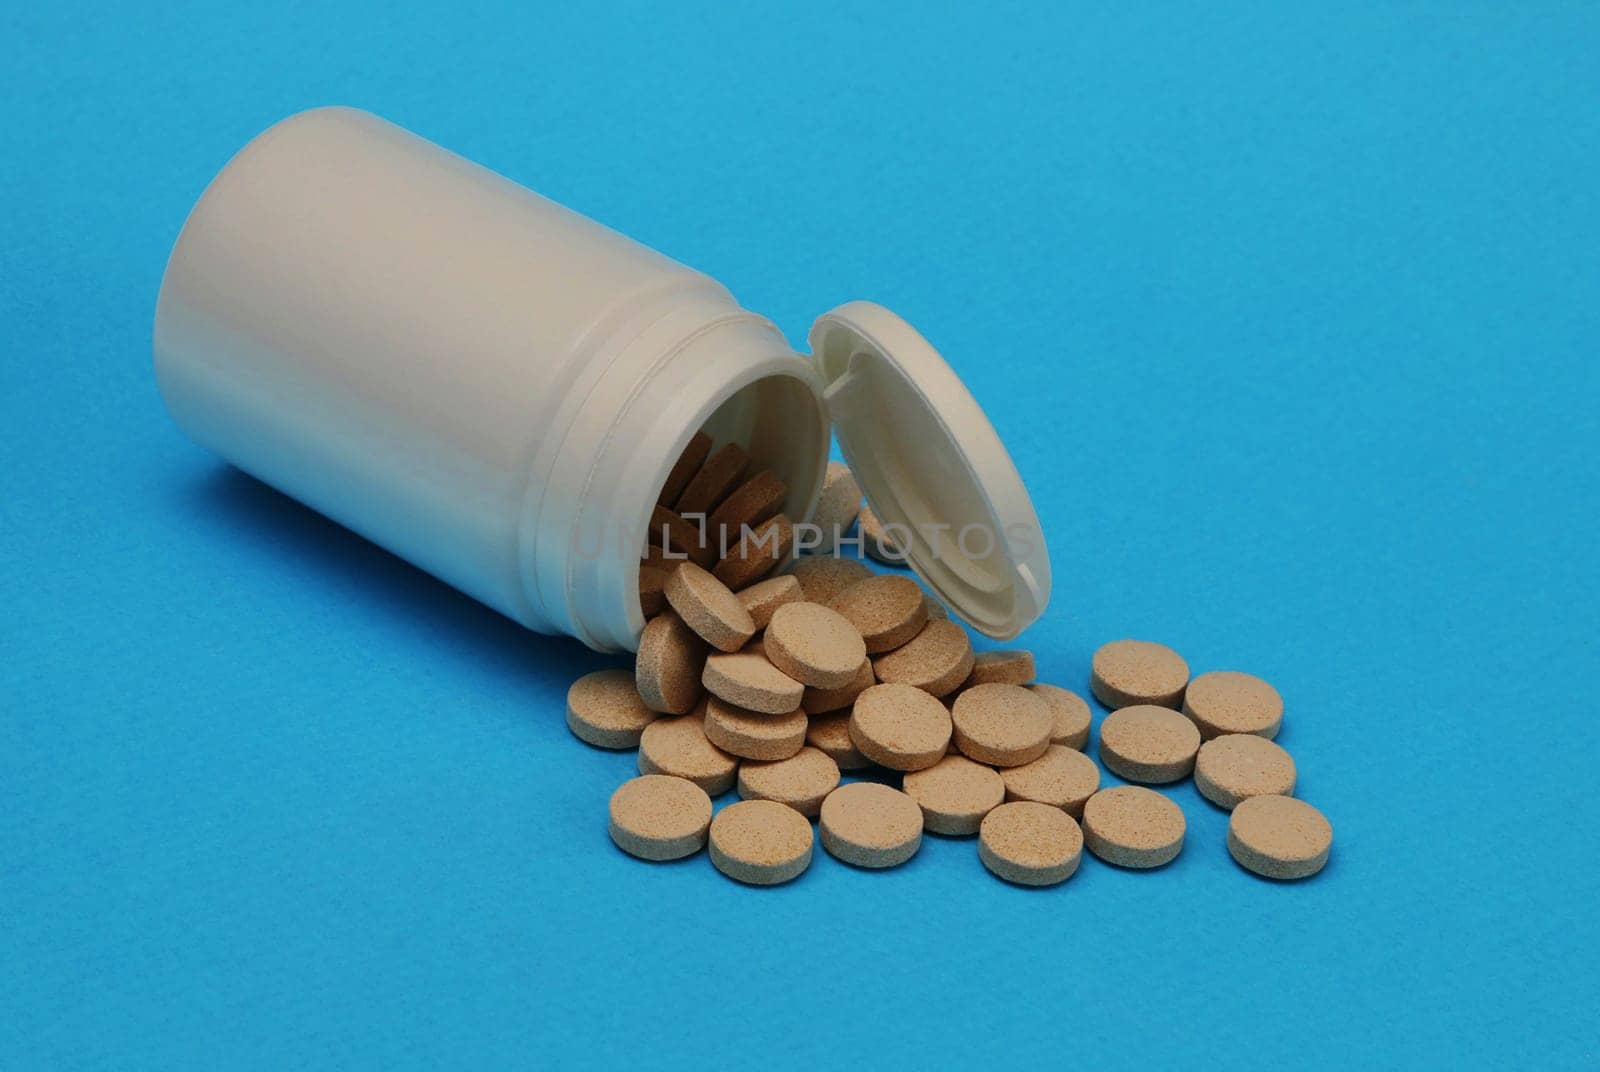 Light brown medicine capsules from a plastic medicine bottle on a blue background. by gelog67